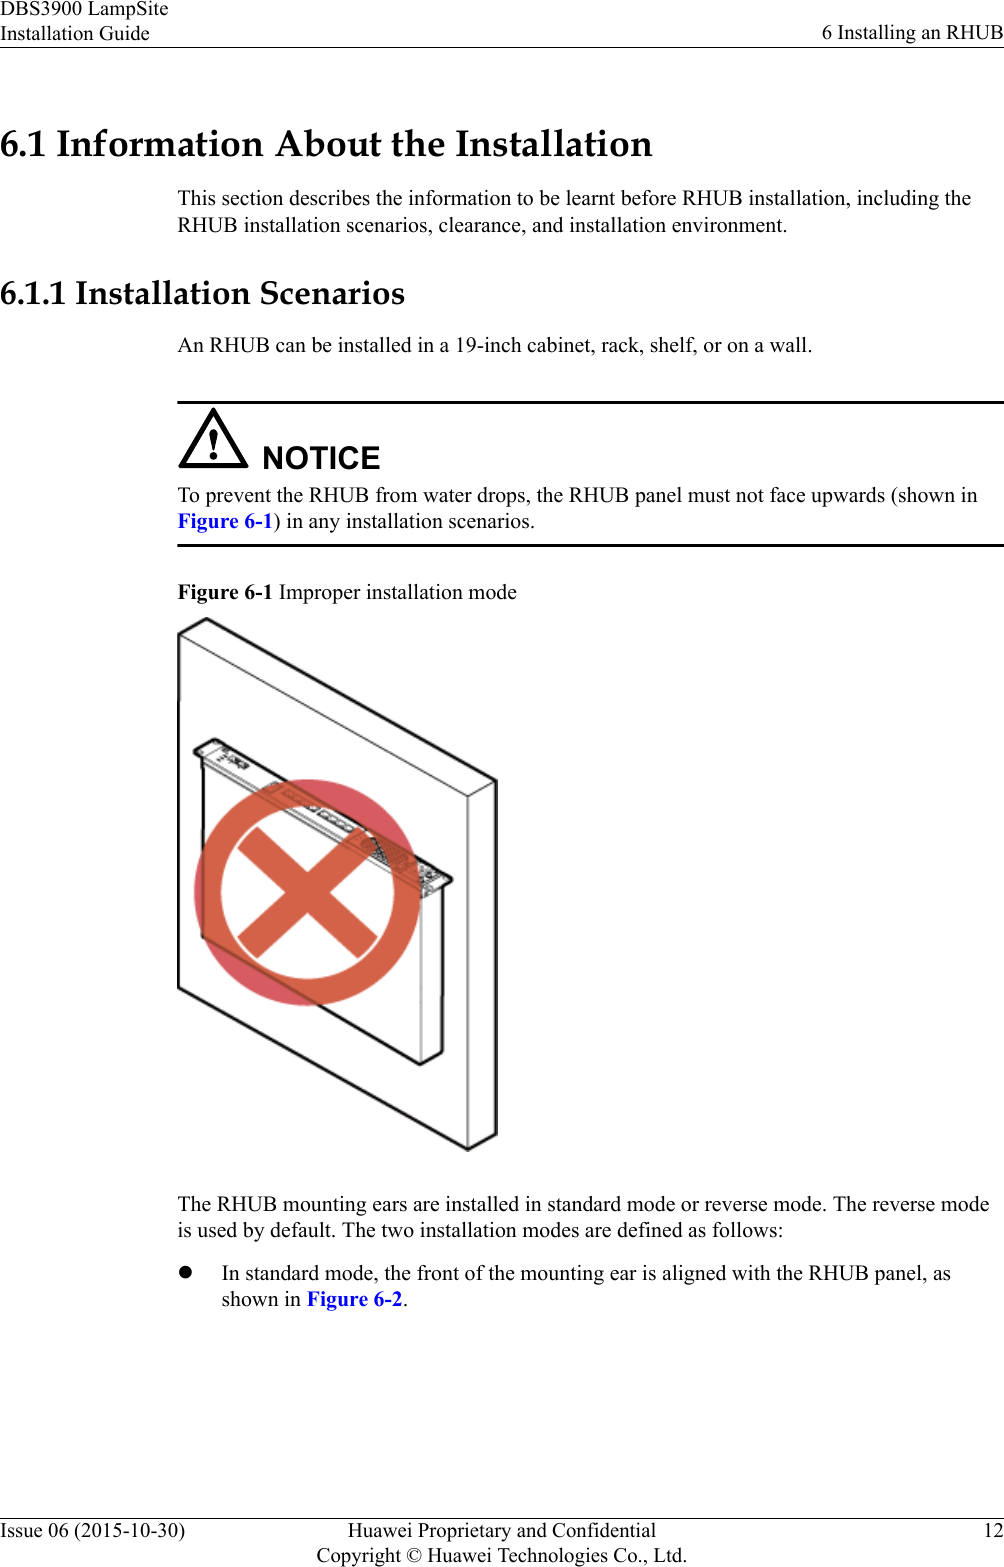 6.1 Information About the InstallationThis section describes the information to be learnt before RHUB installation, including theRHUB installation scenarios, clearance, and installation environment.6.1.1 Installation ScenariosAn RHUB can be installed in a 19-inch cabinet, rack, shelf, or on a wall.NOTICETo prevent the RHUB from water drops, the RHUB panel must not face upwards (shown inFigure 6-1) in any installation scenarios.Figure 6-1 Improper installation modeThe RHUB mounting ears are installed in standard mode or reverse mode. The reverse modeis used by default. The two installation modes are defined as follows:lIn standard mode, the front of the mounting ear is aligned with the RHUB panel, asshown in Figure 6-2.DBS3900 LampSiteInstallation Guide 6 Installing an RHUBIssue 06 (2015-10-30) Huawei Proprietary and ConfidentialCopyright © Huawei Technologies Co., Ltd.12